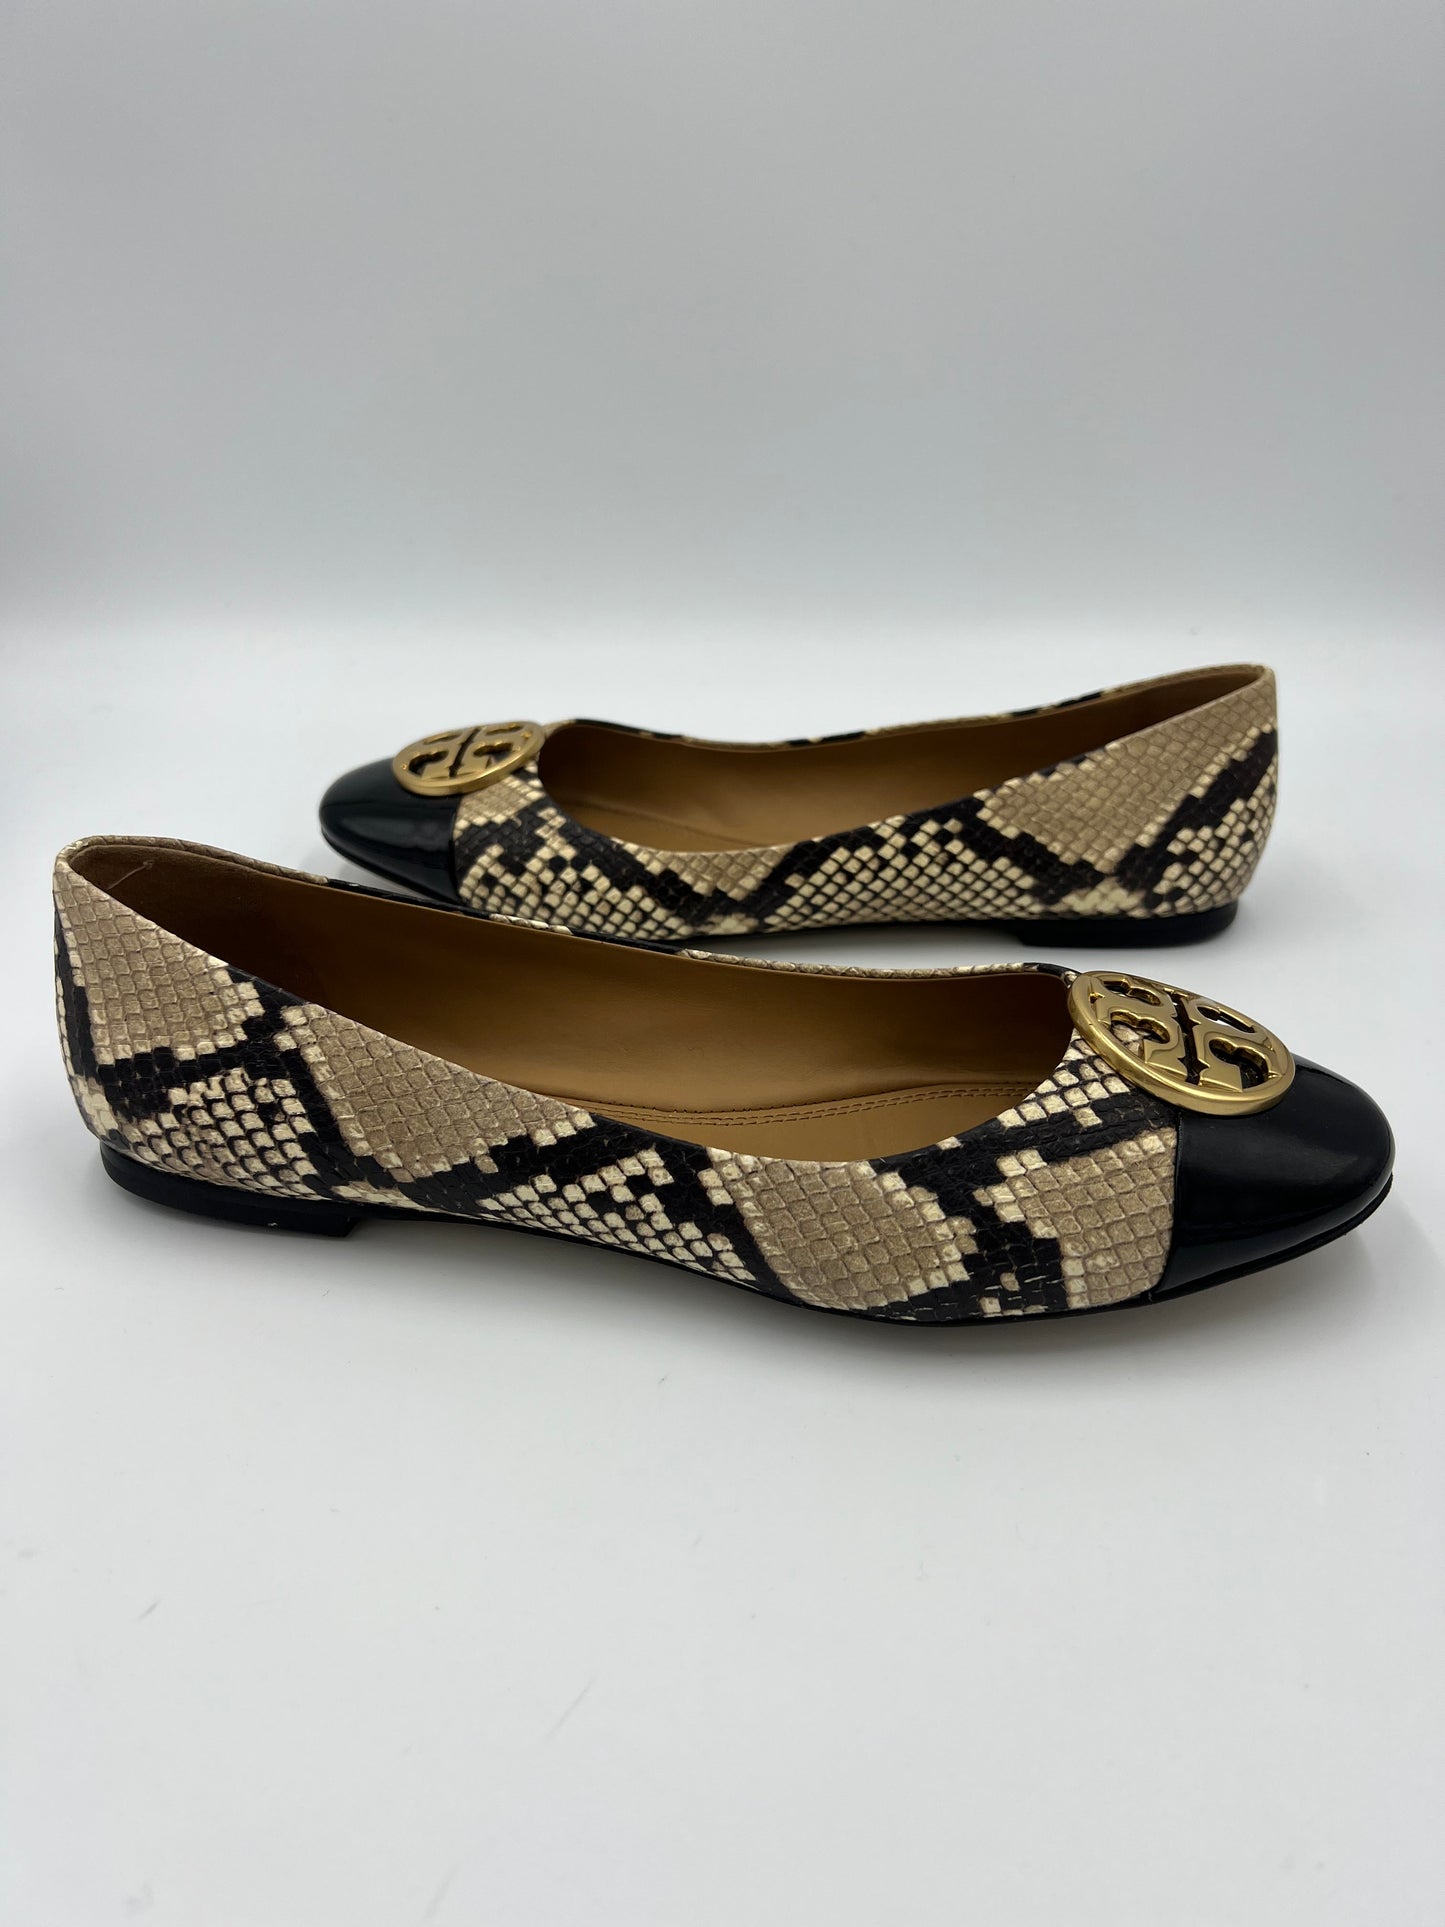 Tory Burch Snakeskin Print Shoes  Size 10